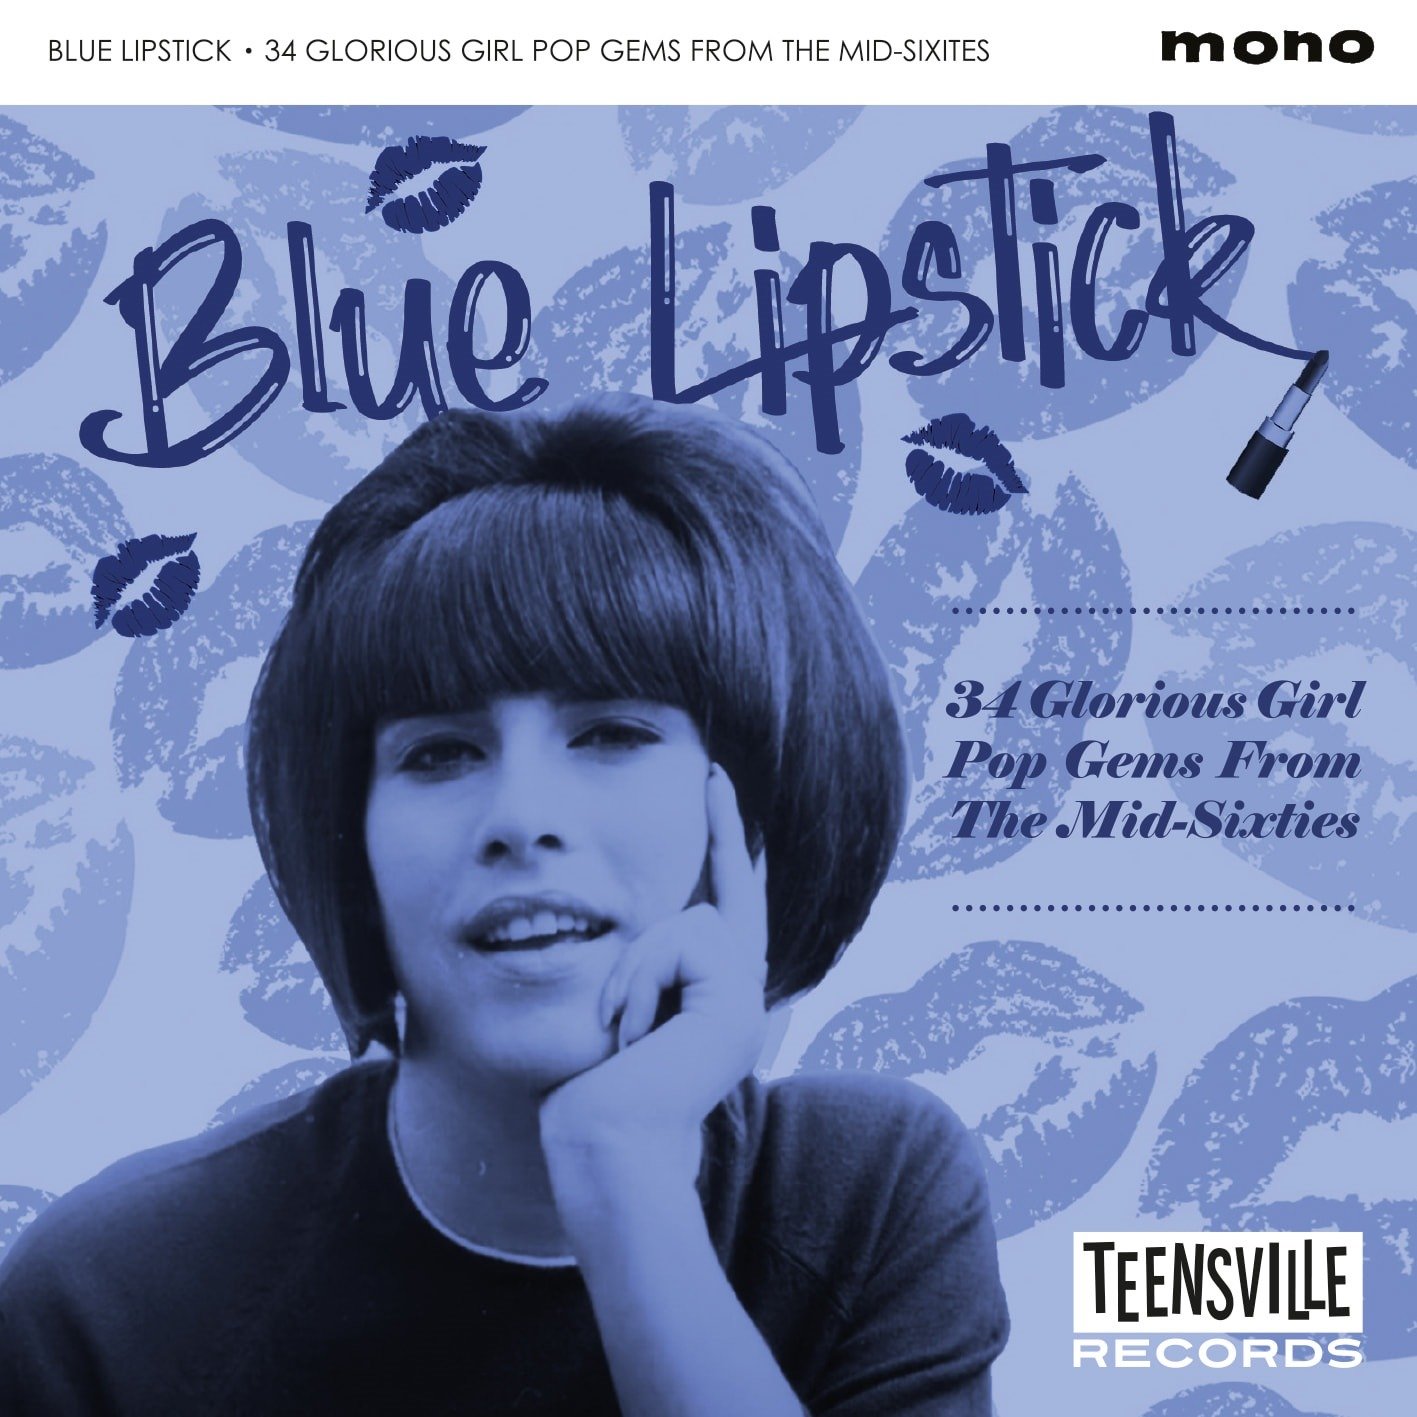 CD Shop - V/A BLUE LIPSTICK - 34 GLORIOUS GIRL POP GEMS FROM THE MID-SIXTIES